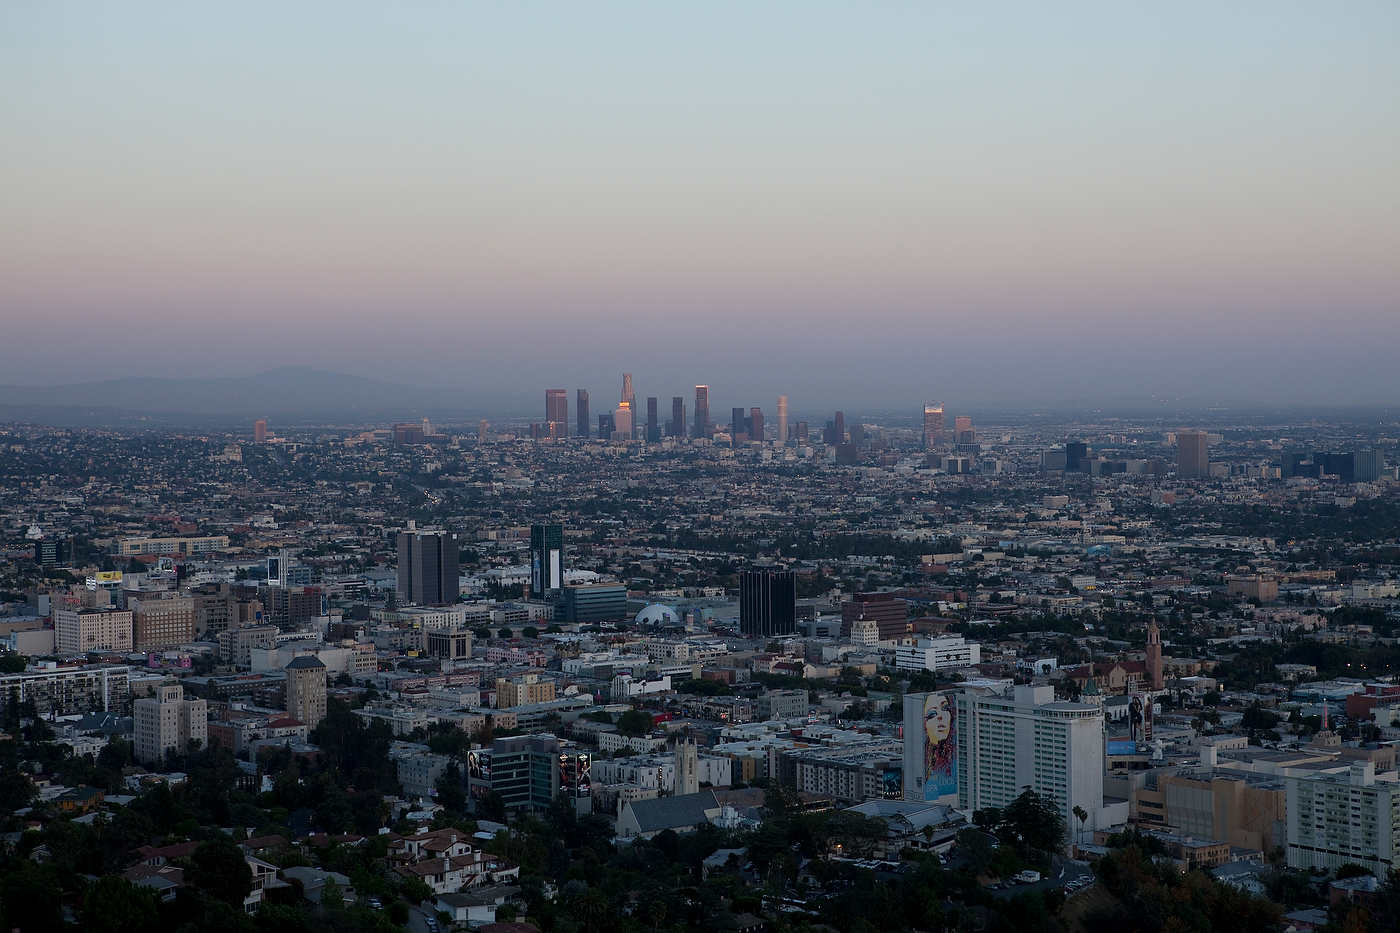 Los Angeles at dusk from Runyon Canyon, above Hollywood, Line 302.